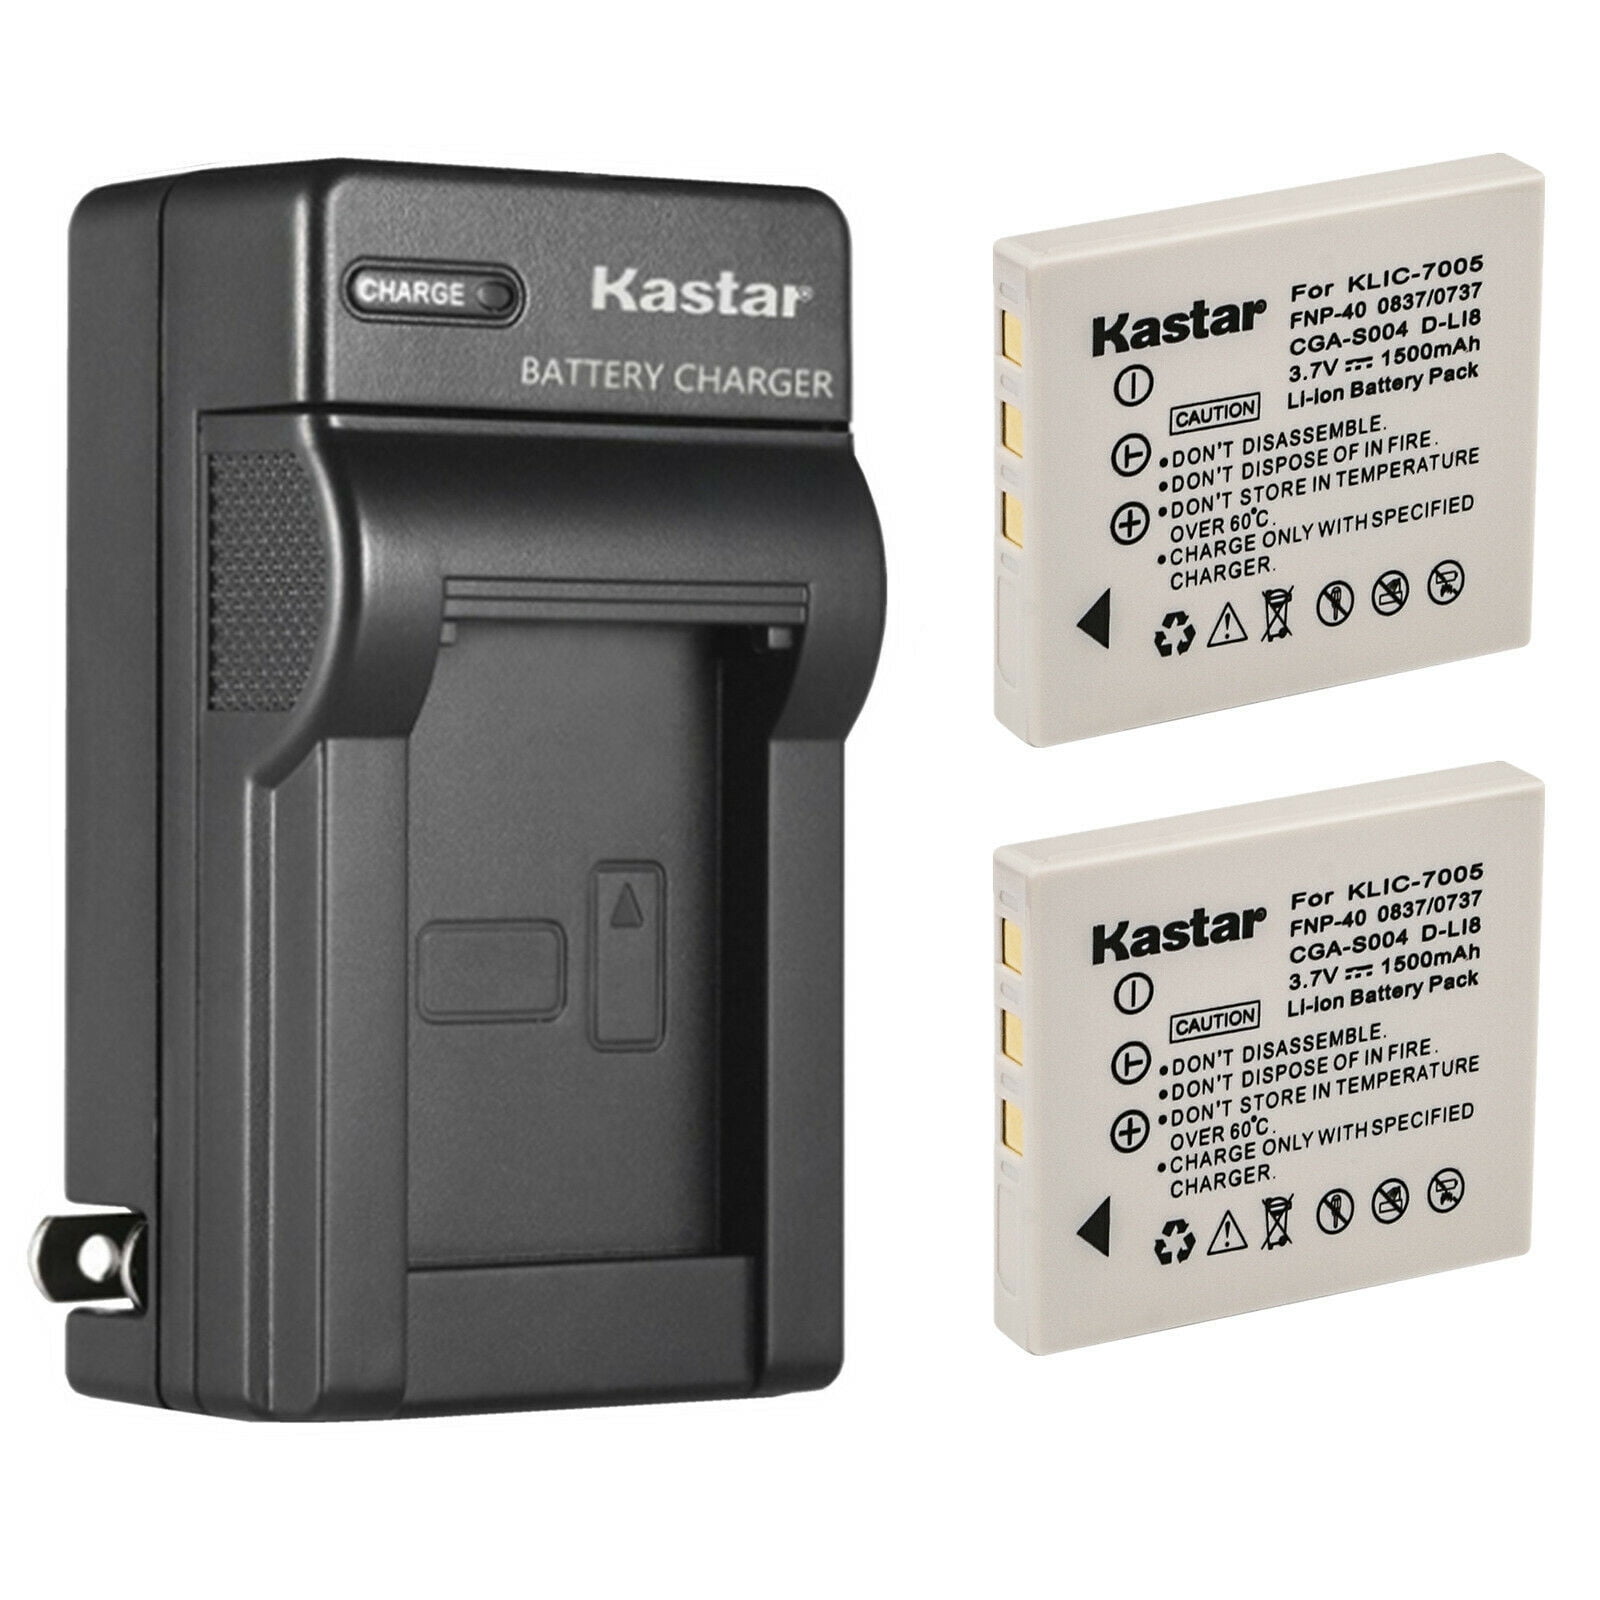 Kastar 1-Pack Battery and Wall Charger Replacement for Fujifilm NP-40 NP-40N Battery, BC-40N Charger, Fuji V10, V10 Zoom, FinePix Z1, FinePix Z1 Zoom, FinePix Z2, FinePix Z3 Zoom -